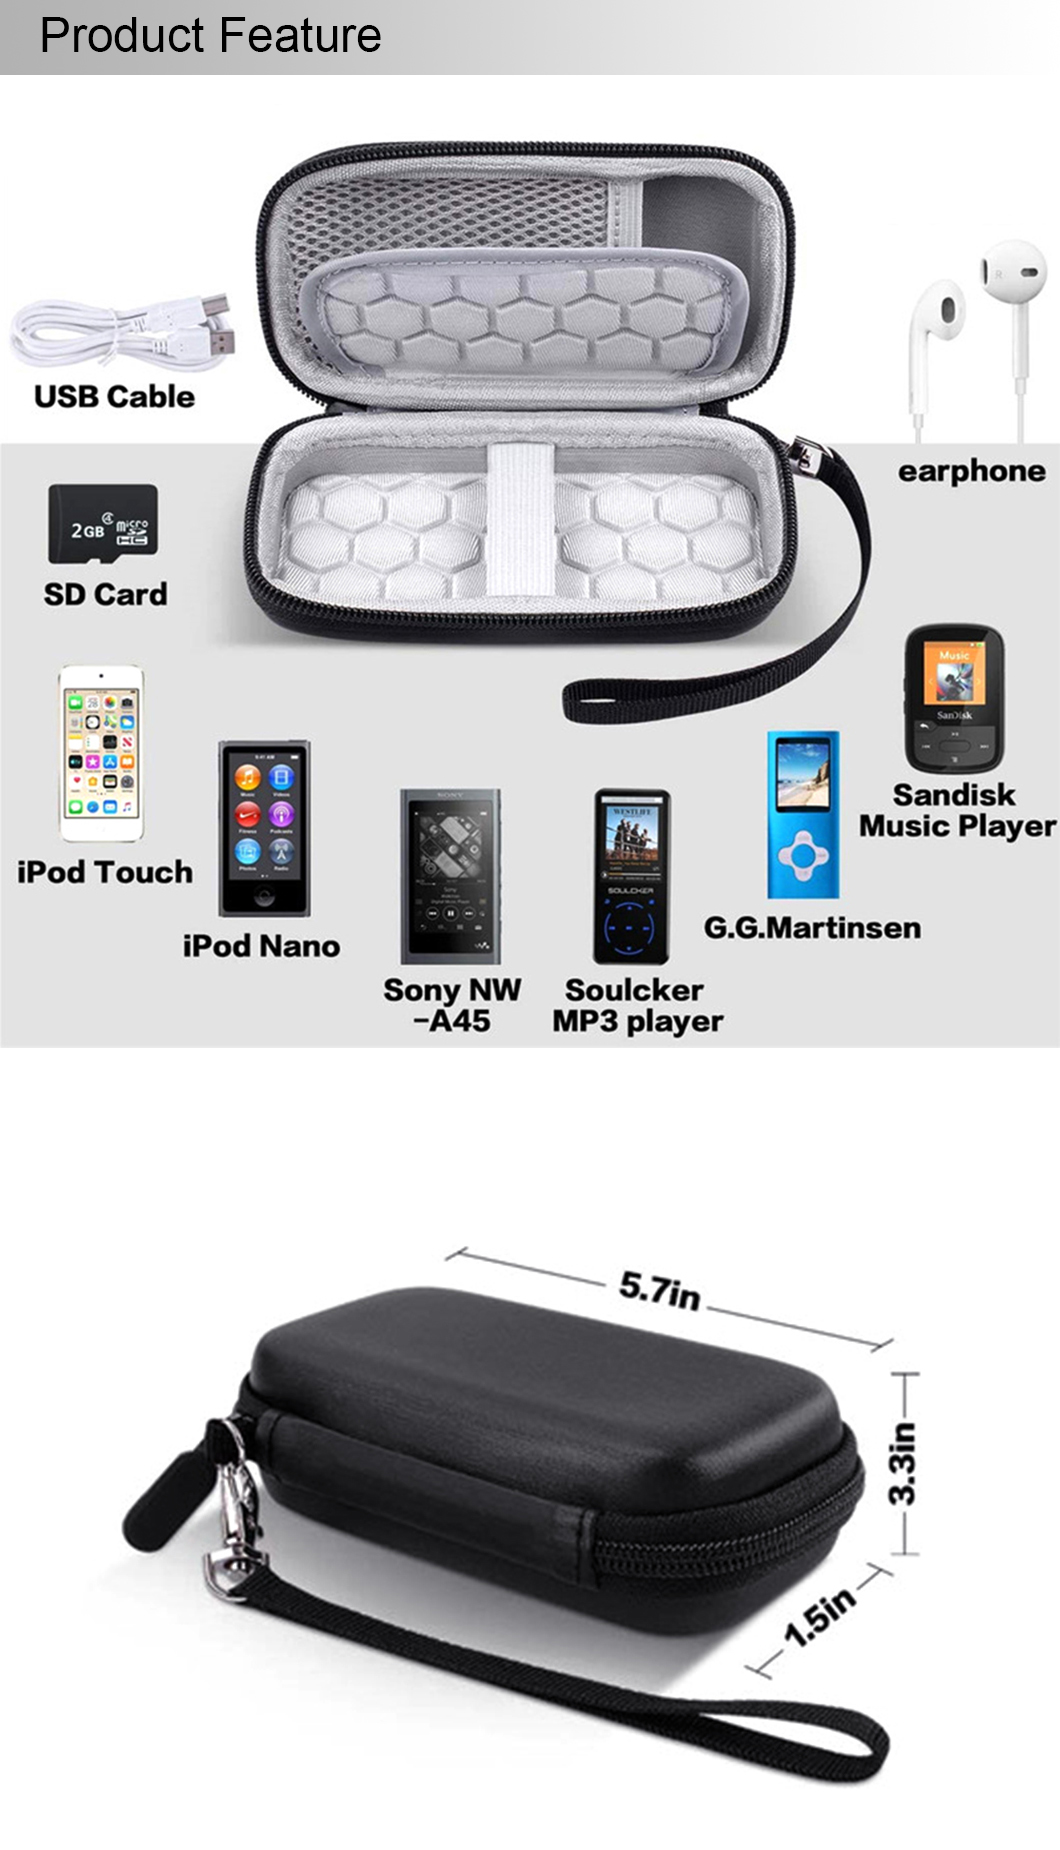 EVA Hard Protective Storage Bag Travel Case for IPod, MP3/MP4 Player, Cables(图2)